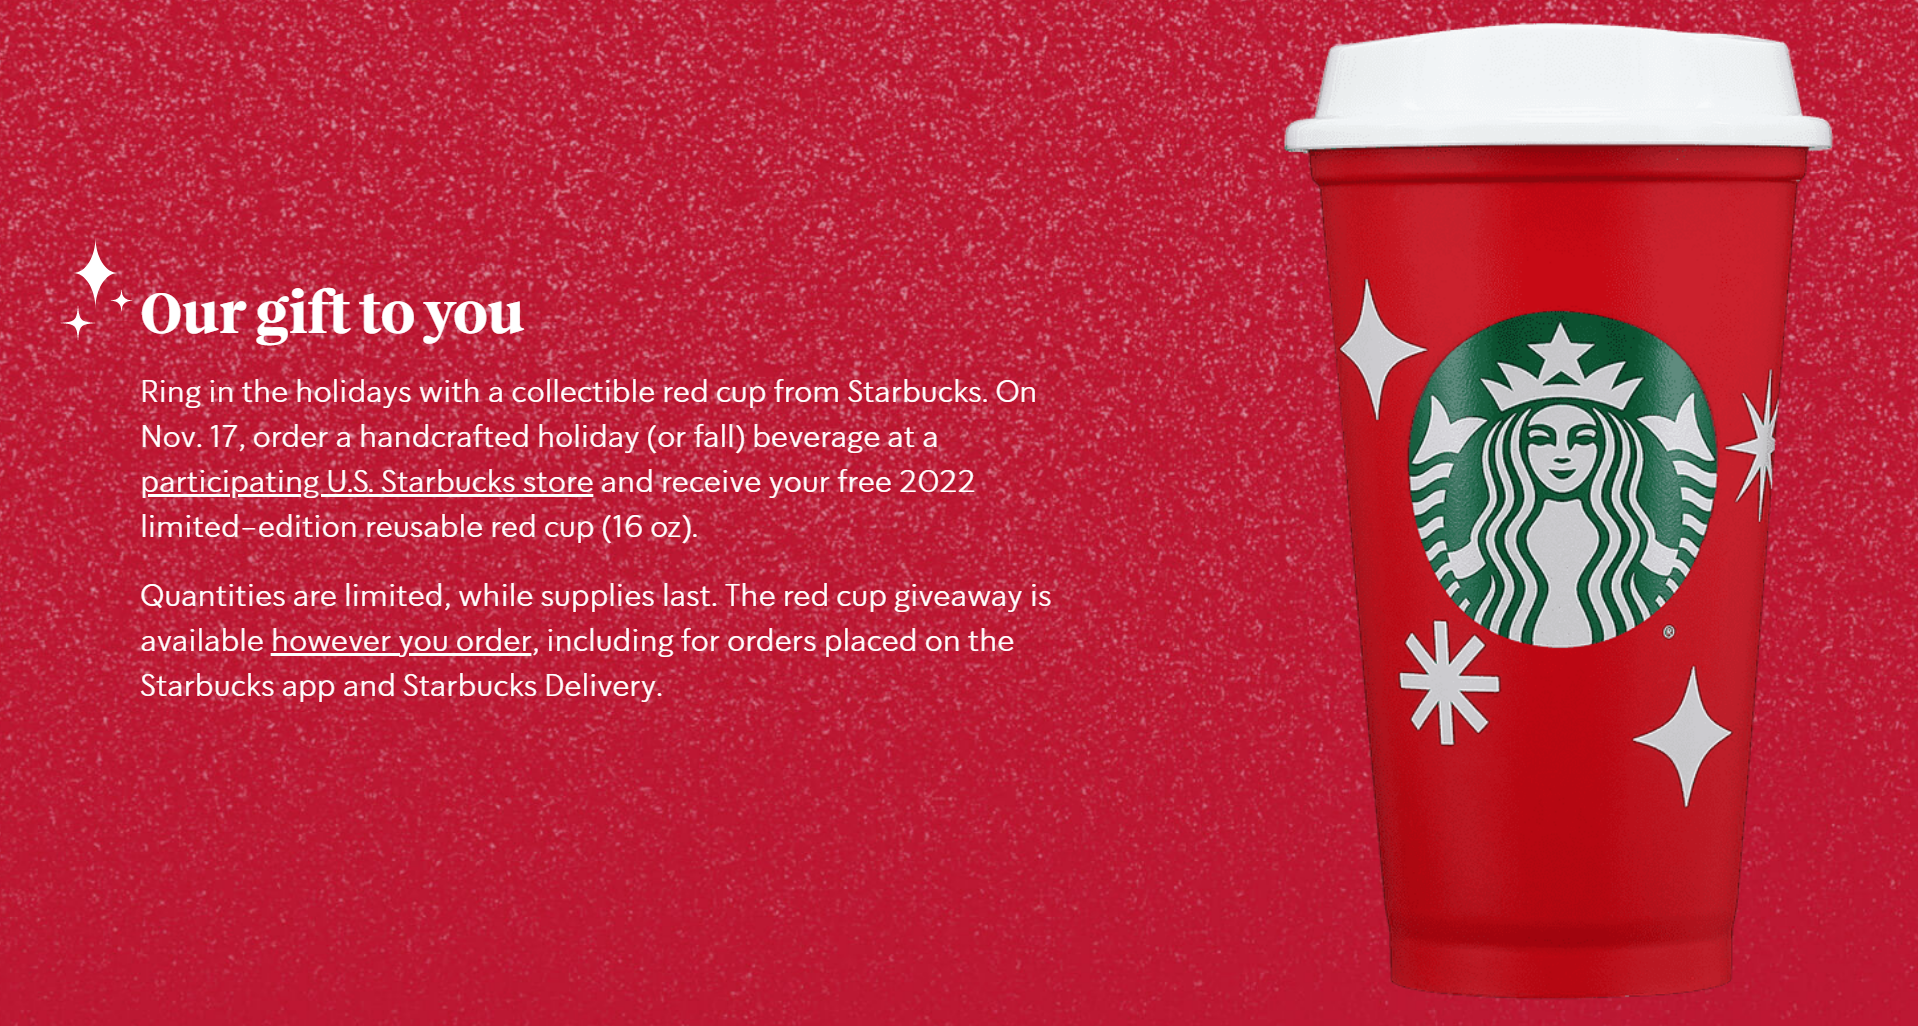 FREE Starbucks Limited-Edition Reusable Red Cup with Purchase on November 17th